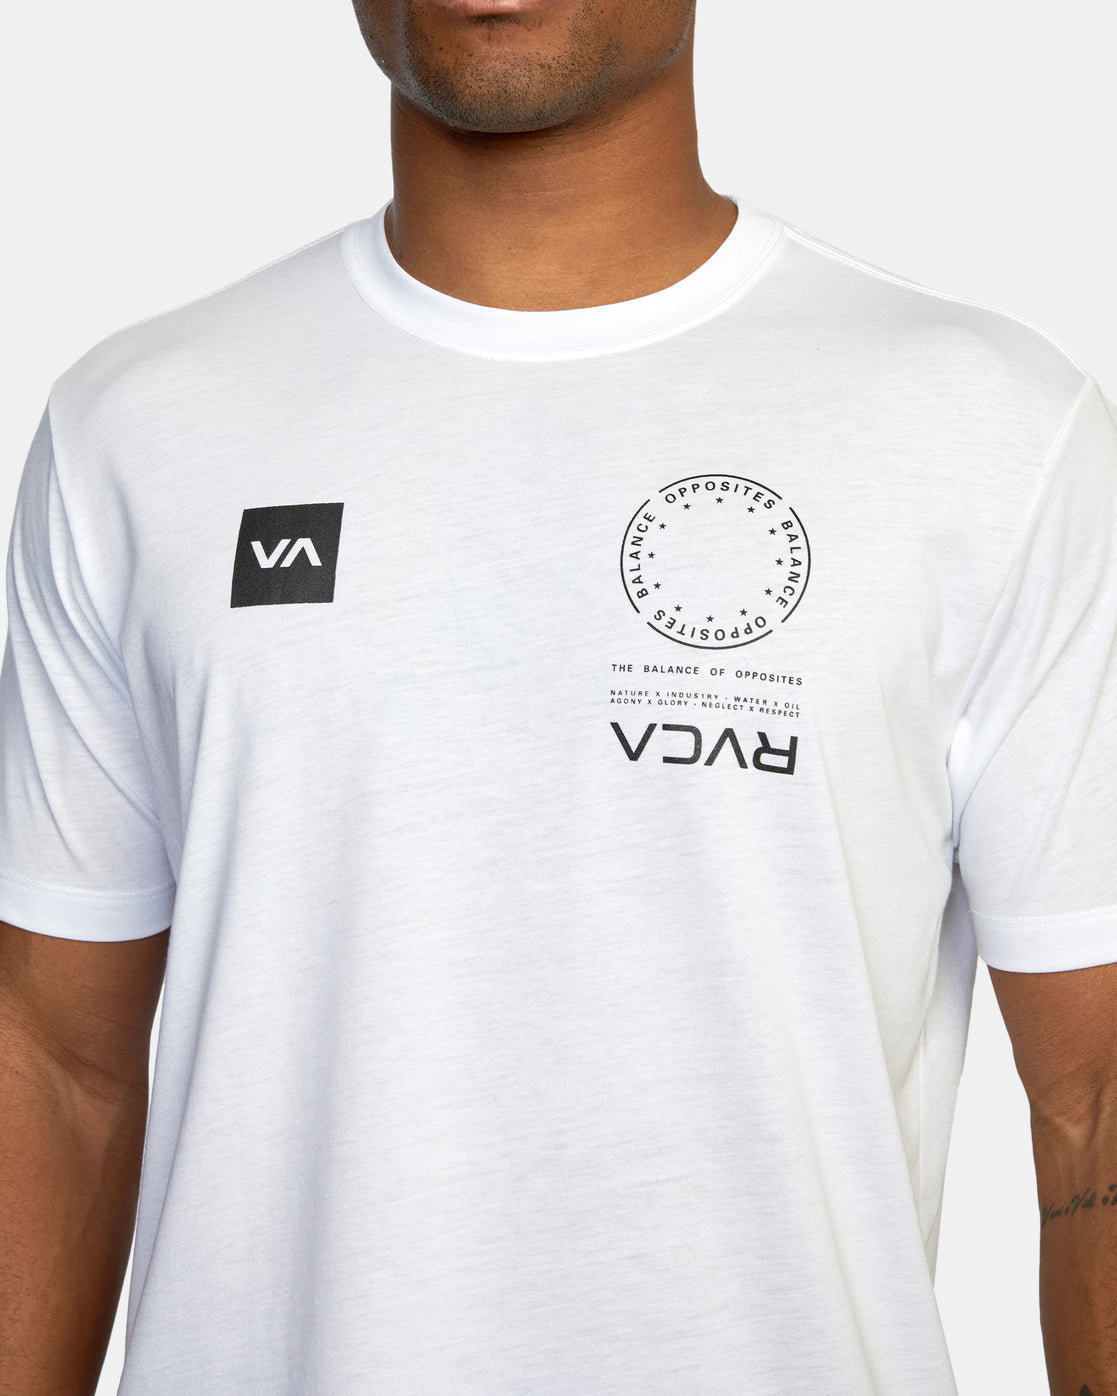 VA MARK SS RVCA WHITE MENS T-SHIRTS CREW NECK REGULAR FIT LIGHT WEIGHT SCREEN PRINTED FRONT AND BACK